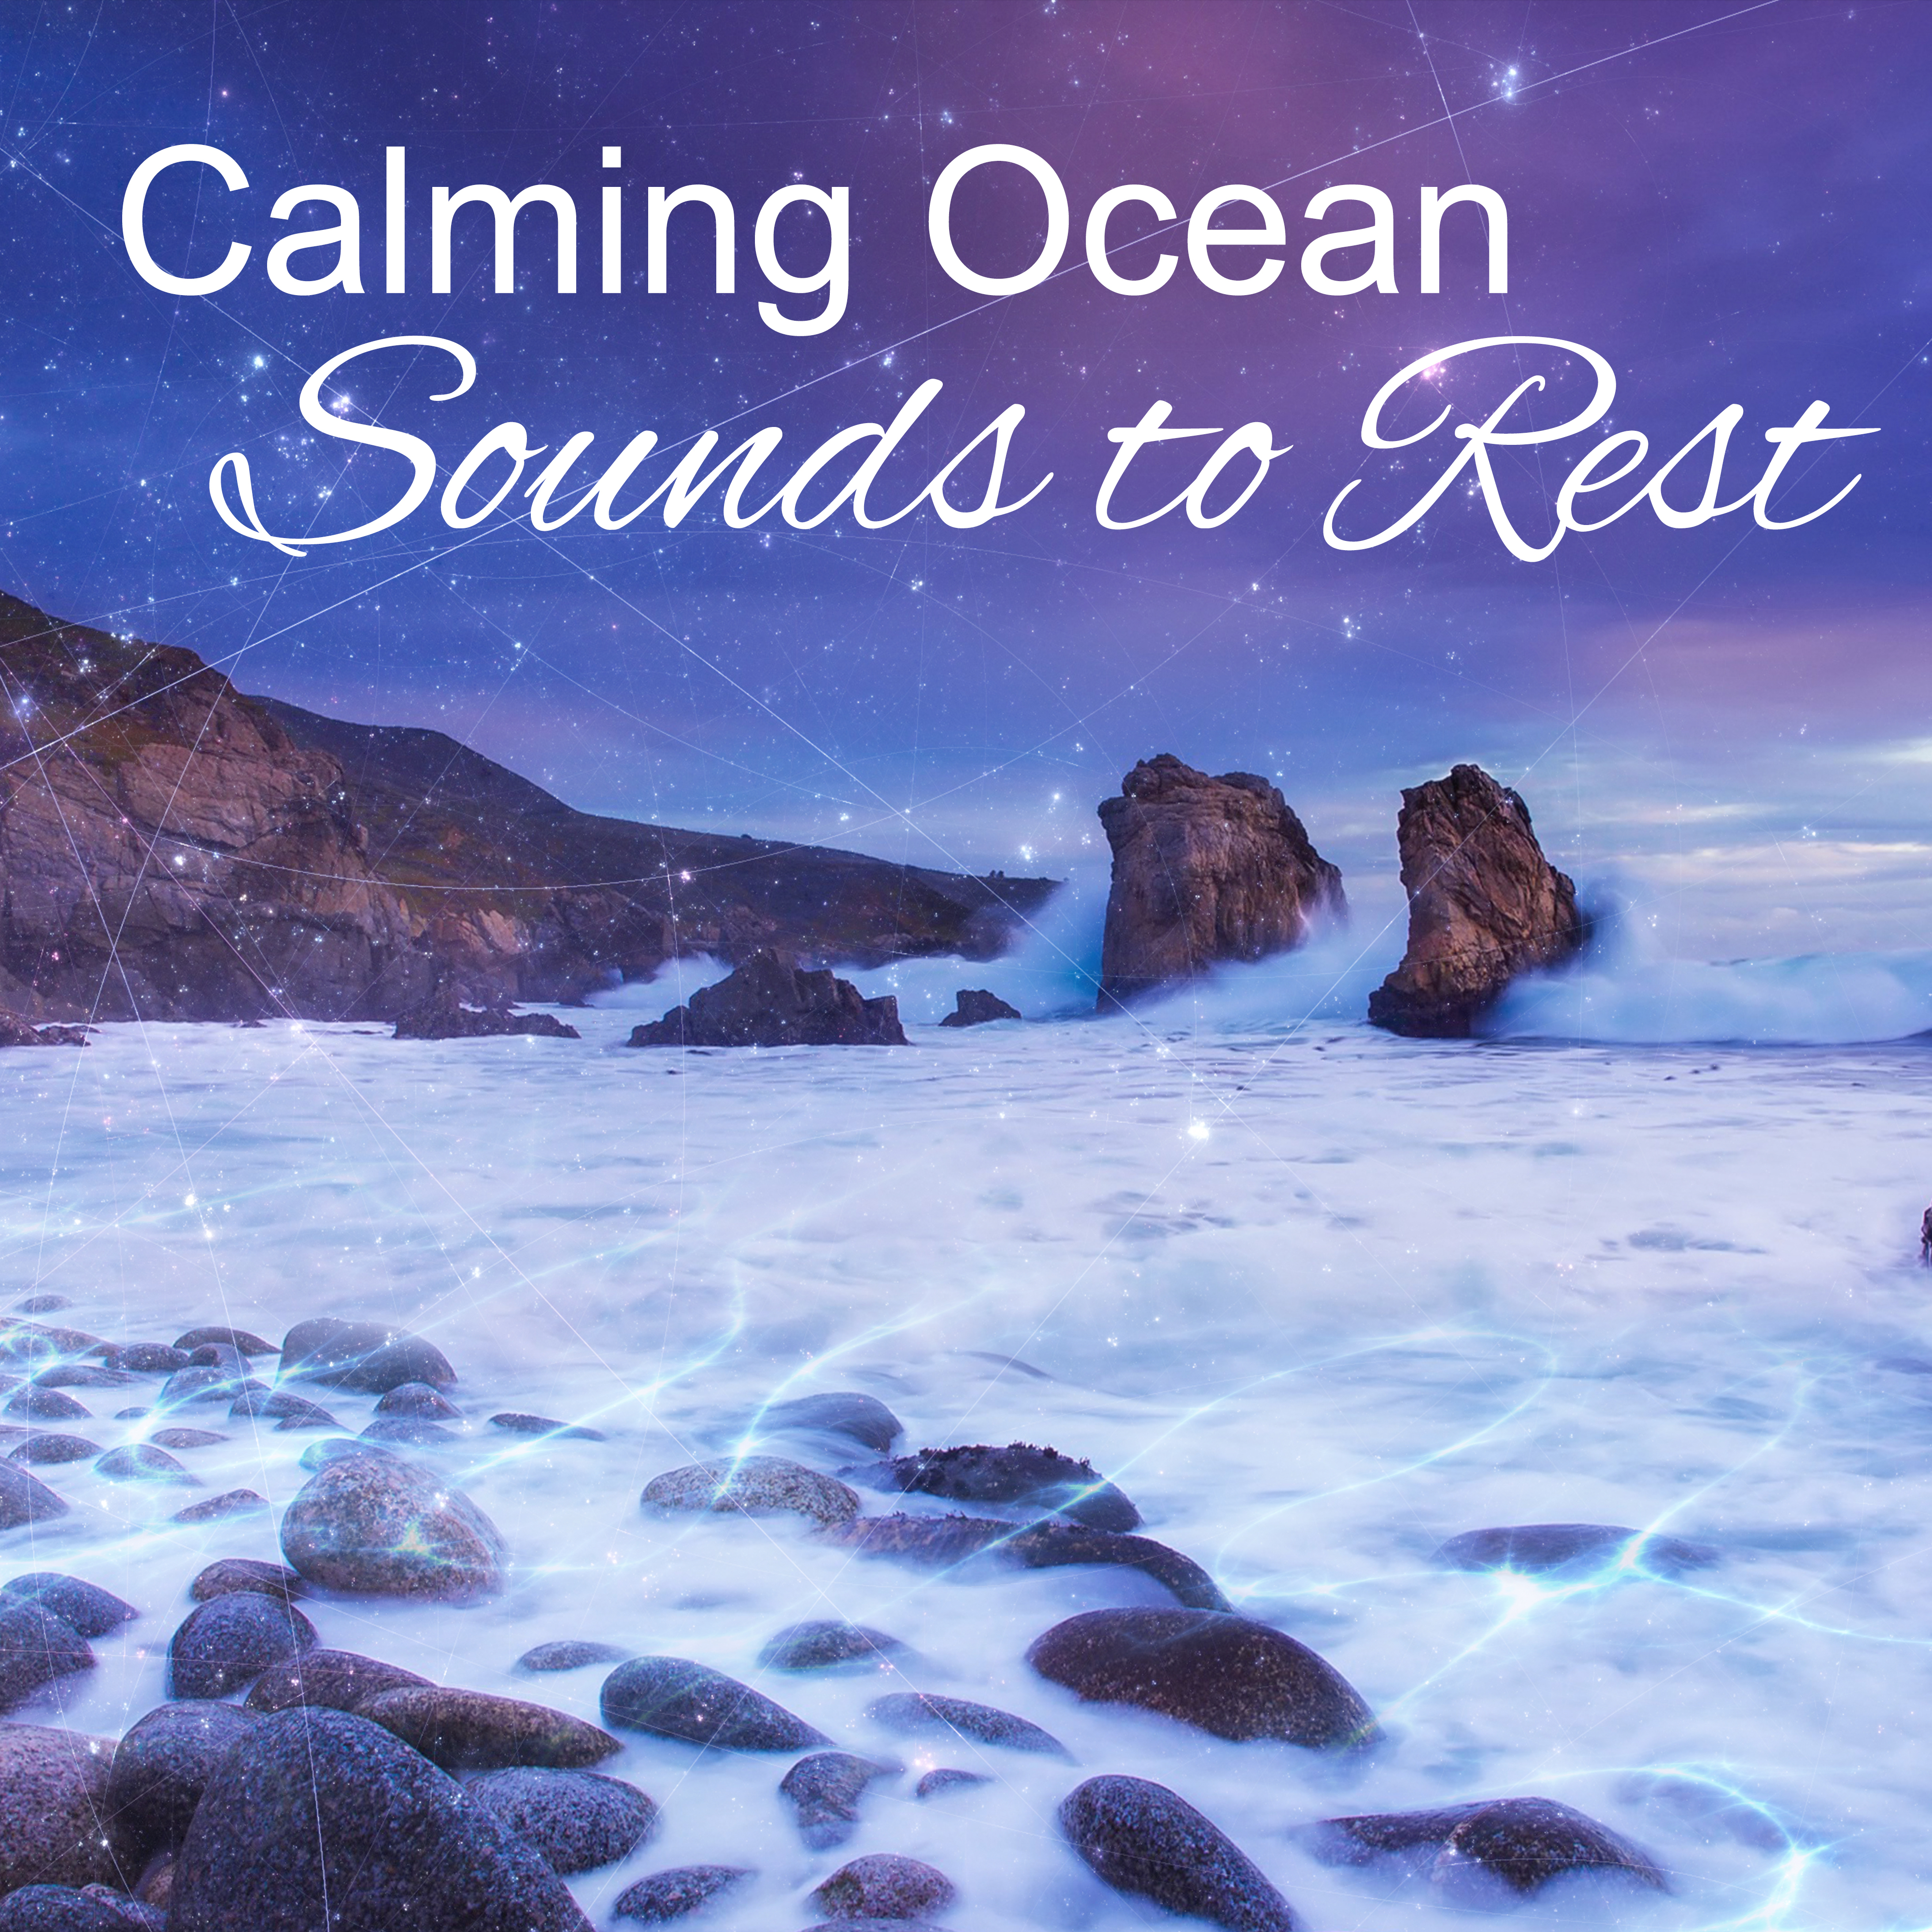 Calming Ocean Sounds to Rest  Soothing Water Waves, Waterfall, New Age Calmness, Stress Relief